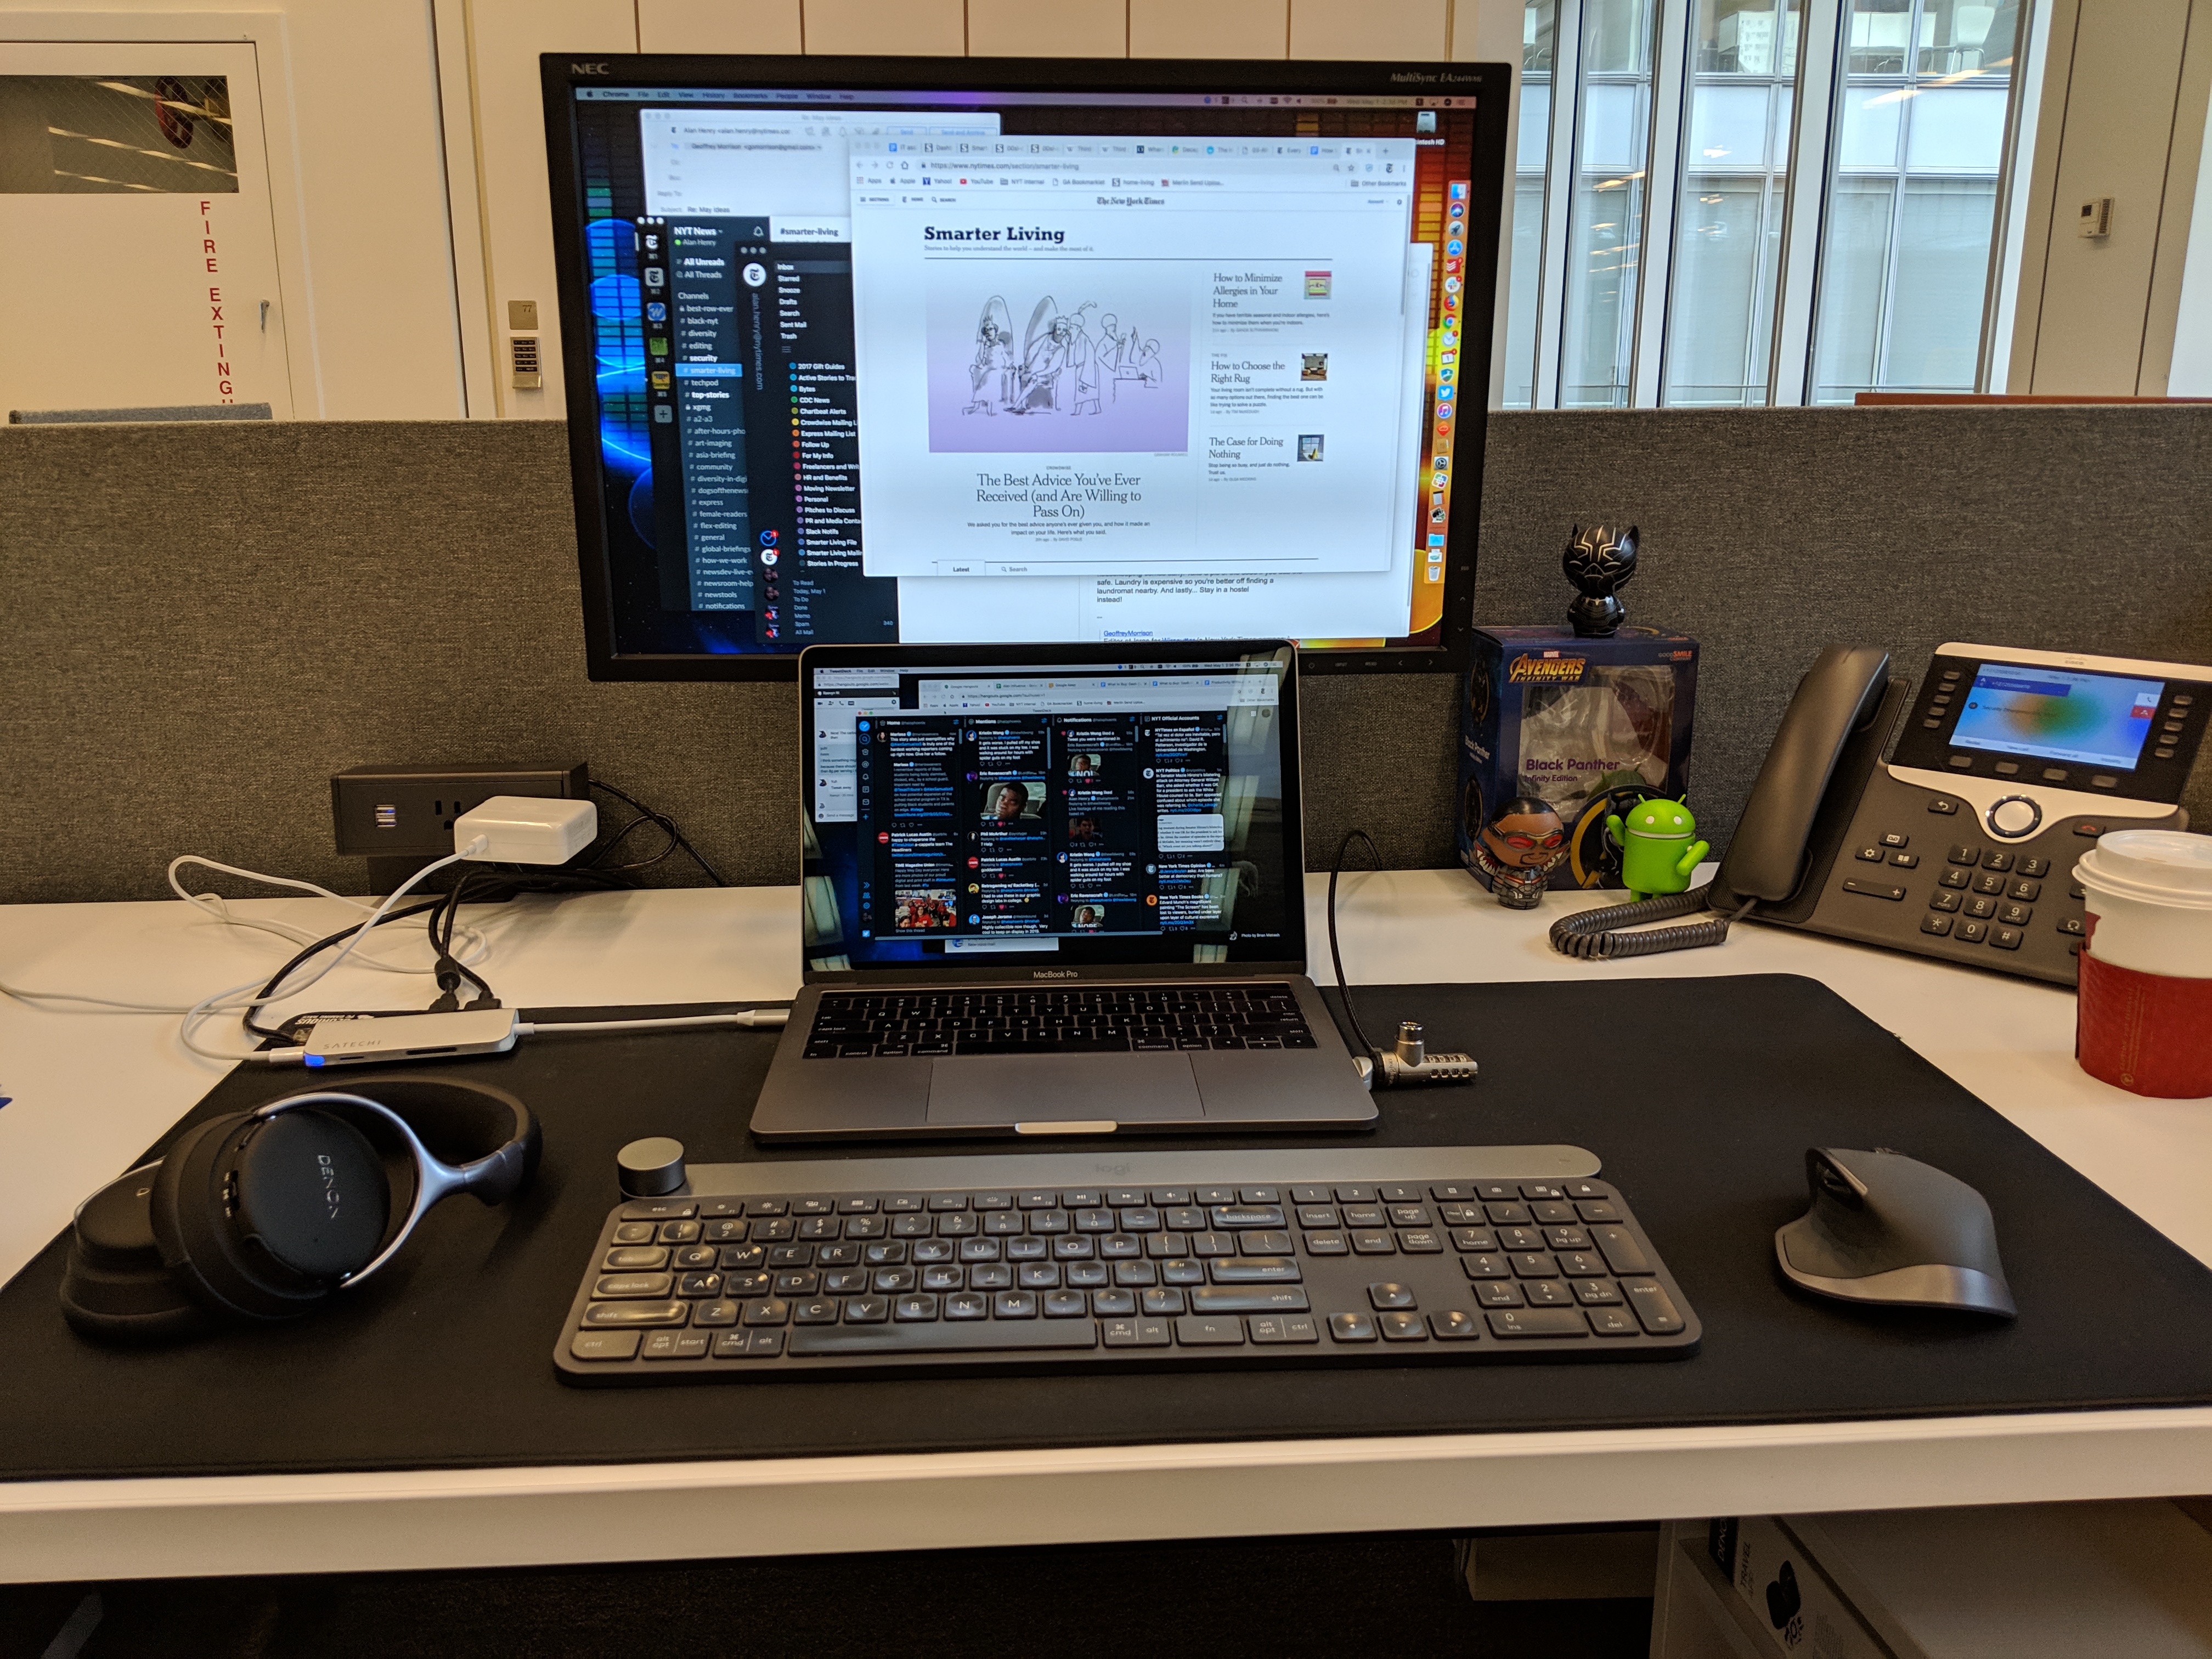 Alan Henry's setup at The New York Times office